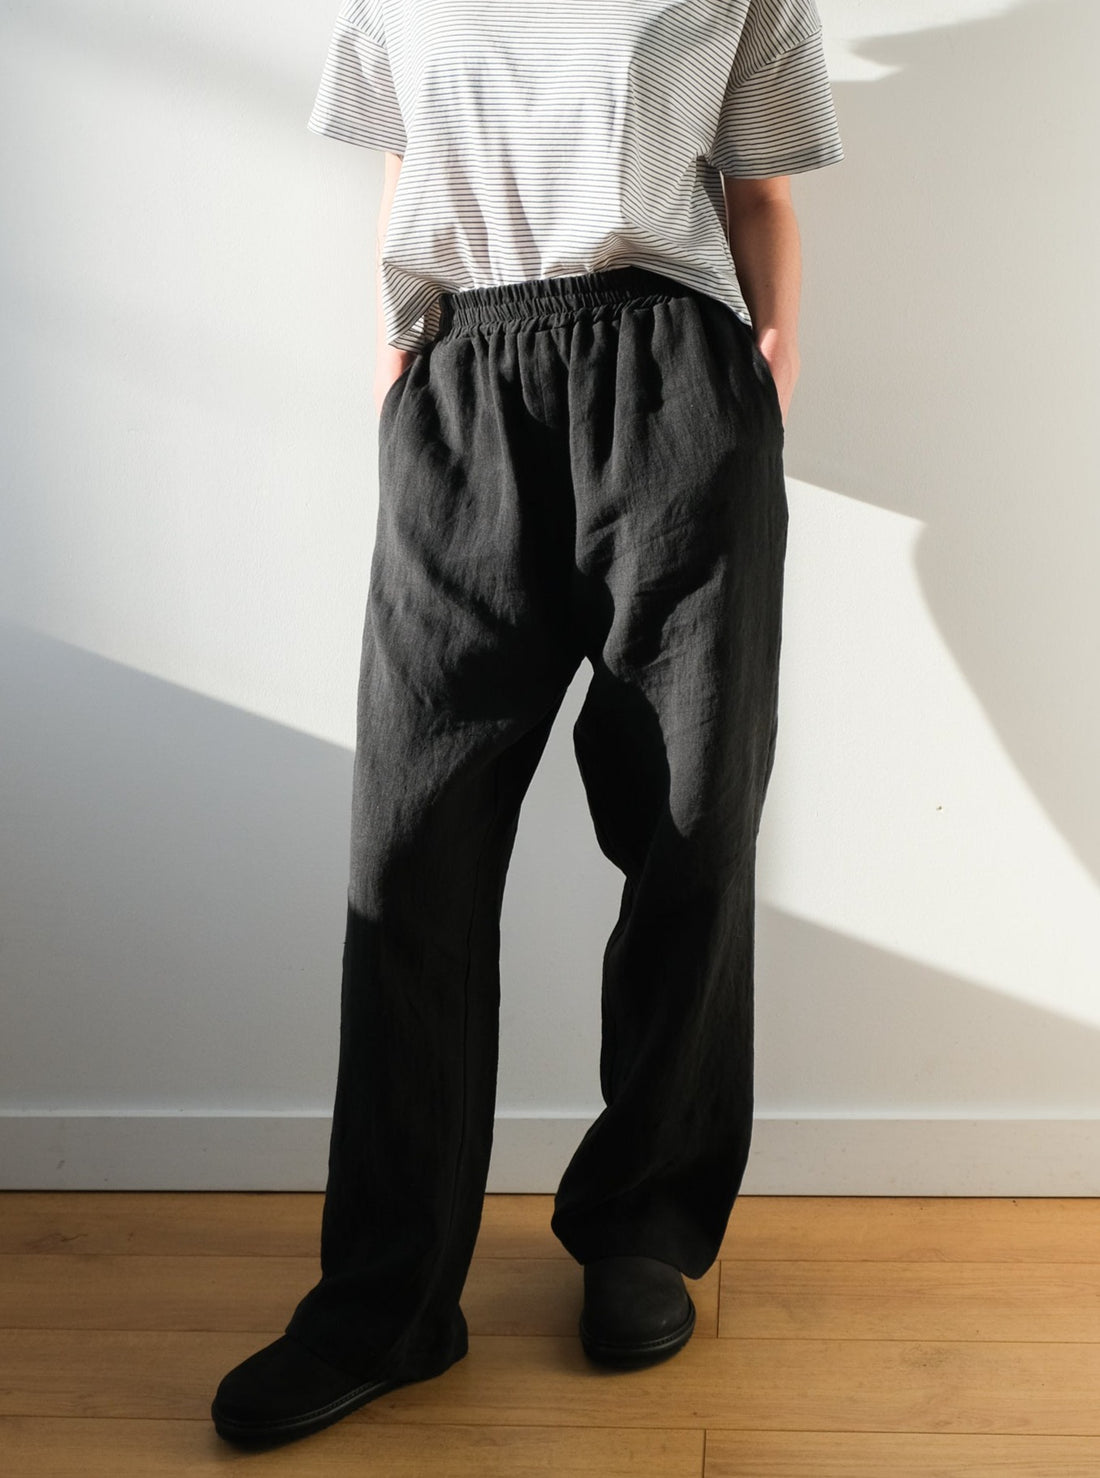 Loose-fitting pants No2334w, linen